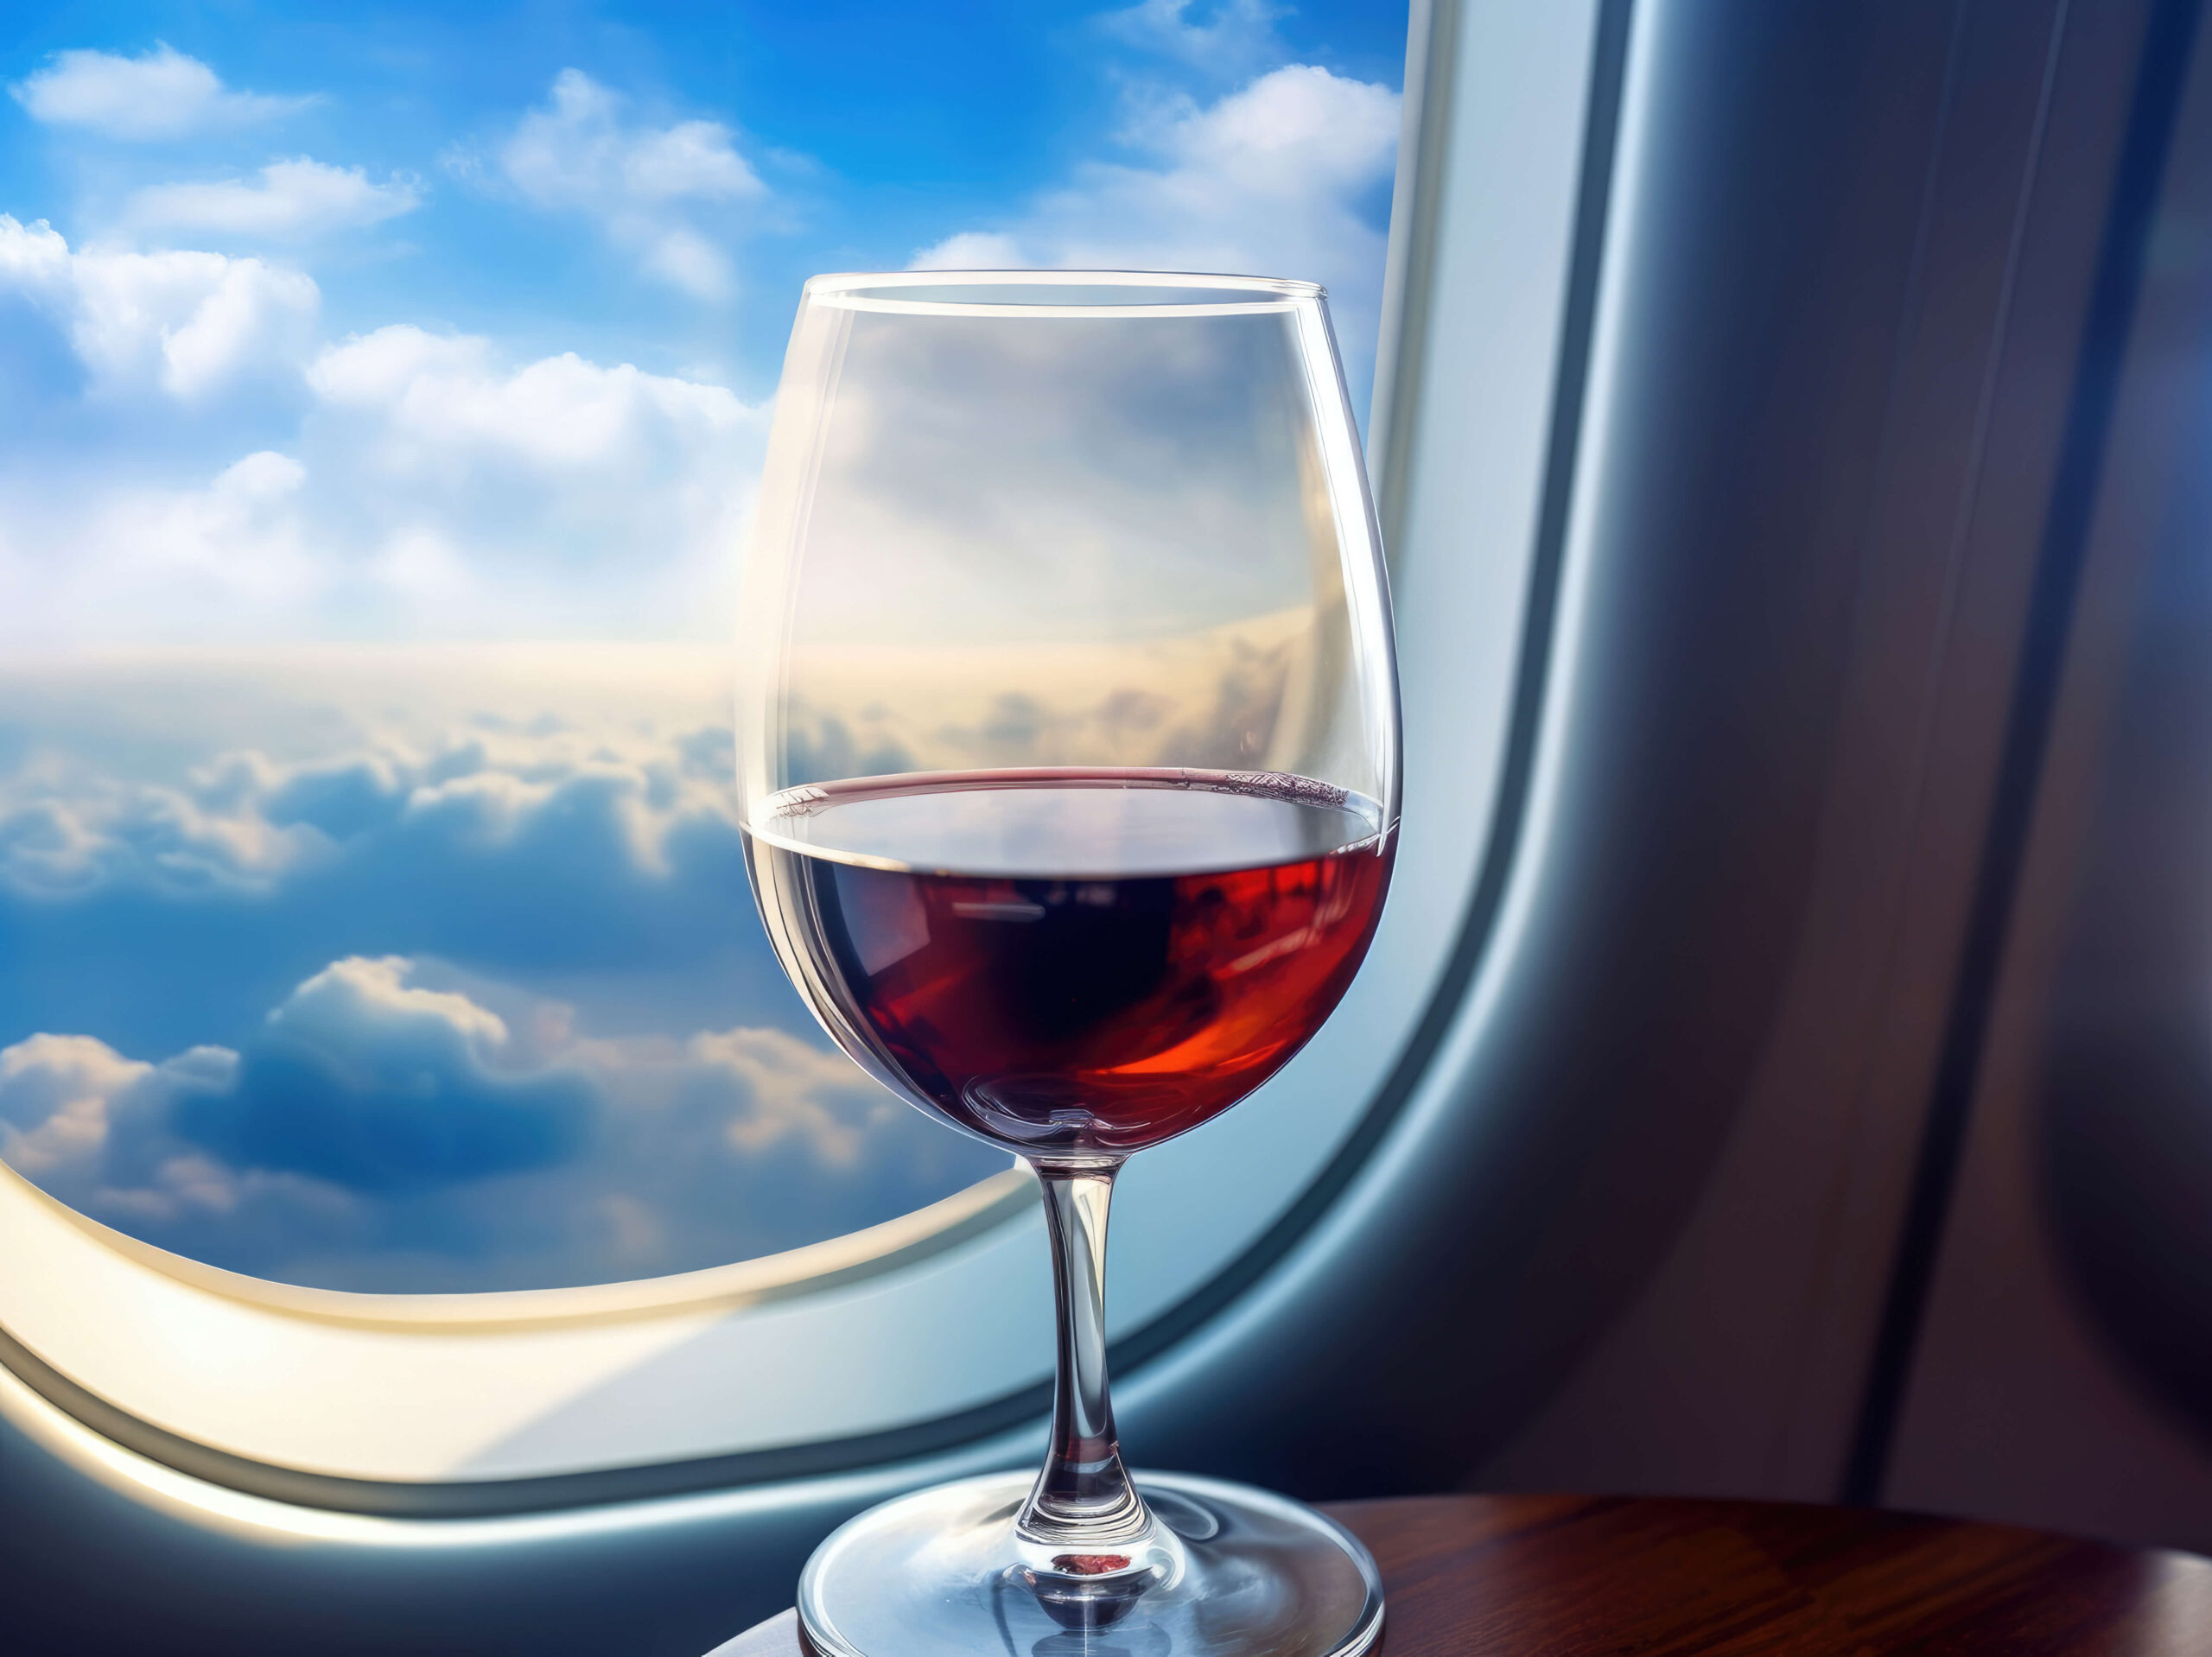 Delta Airlines Enhances In-Flight Experience with Exclusive Wine Program Featuring Rioja